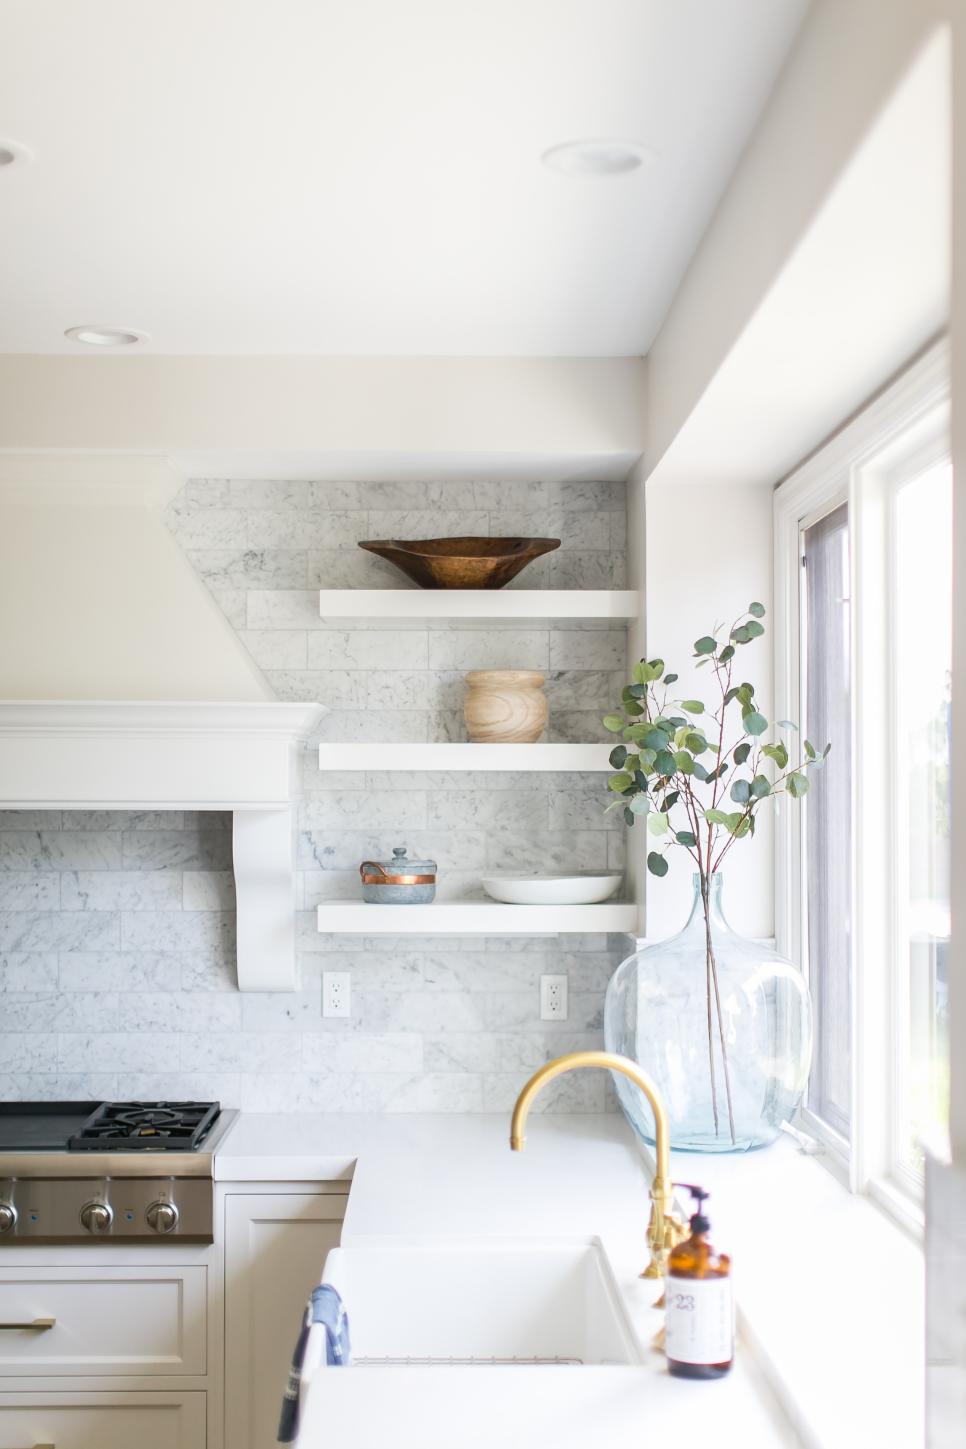 Contemporary Kitchen With White Marble Tile Backsplash And Countertops